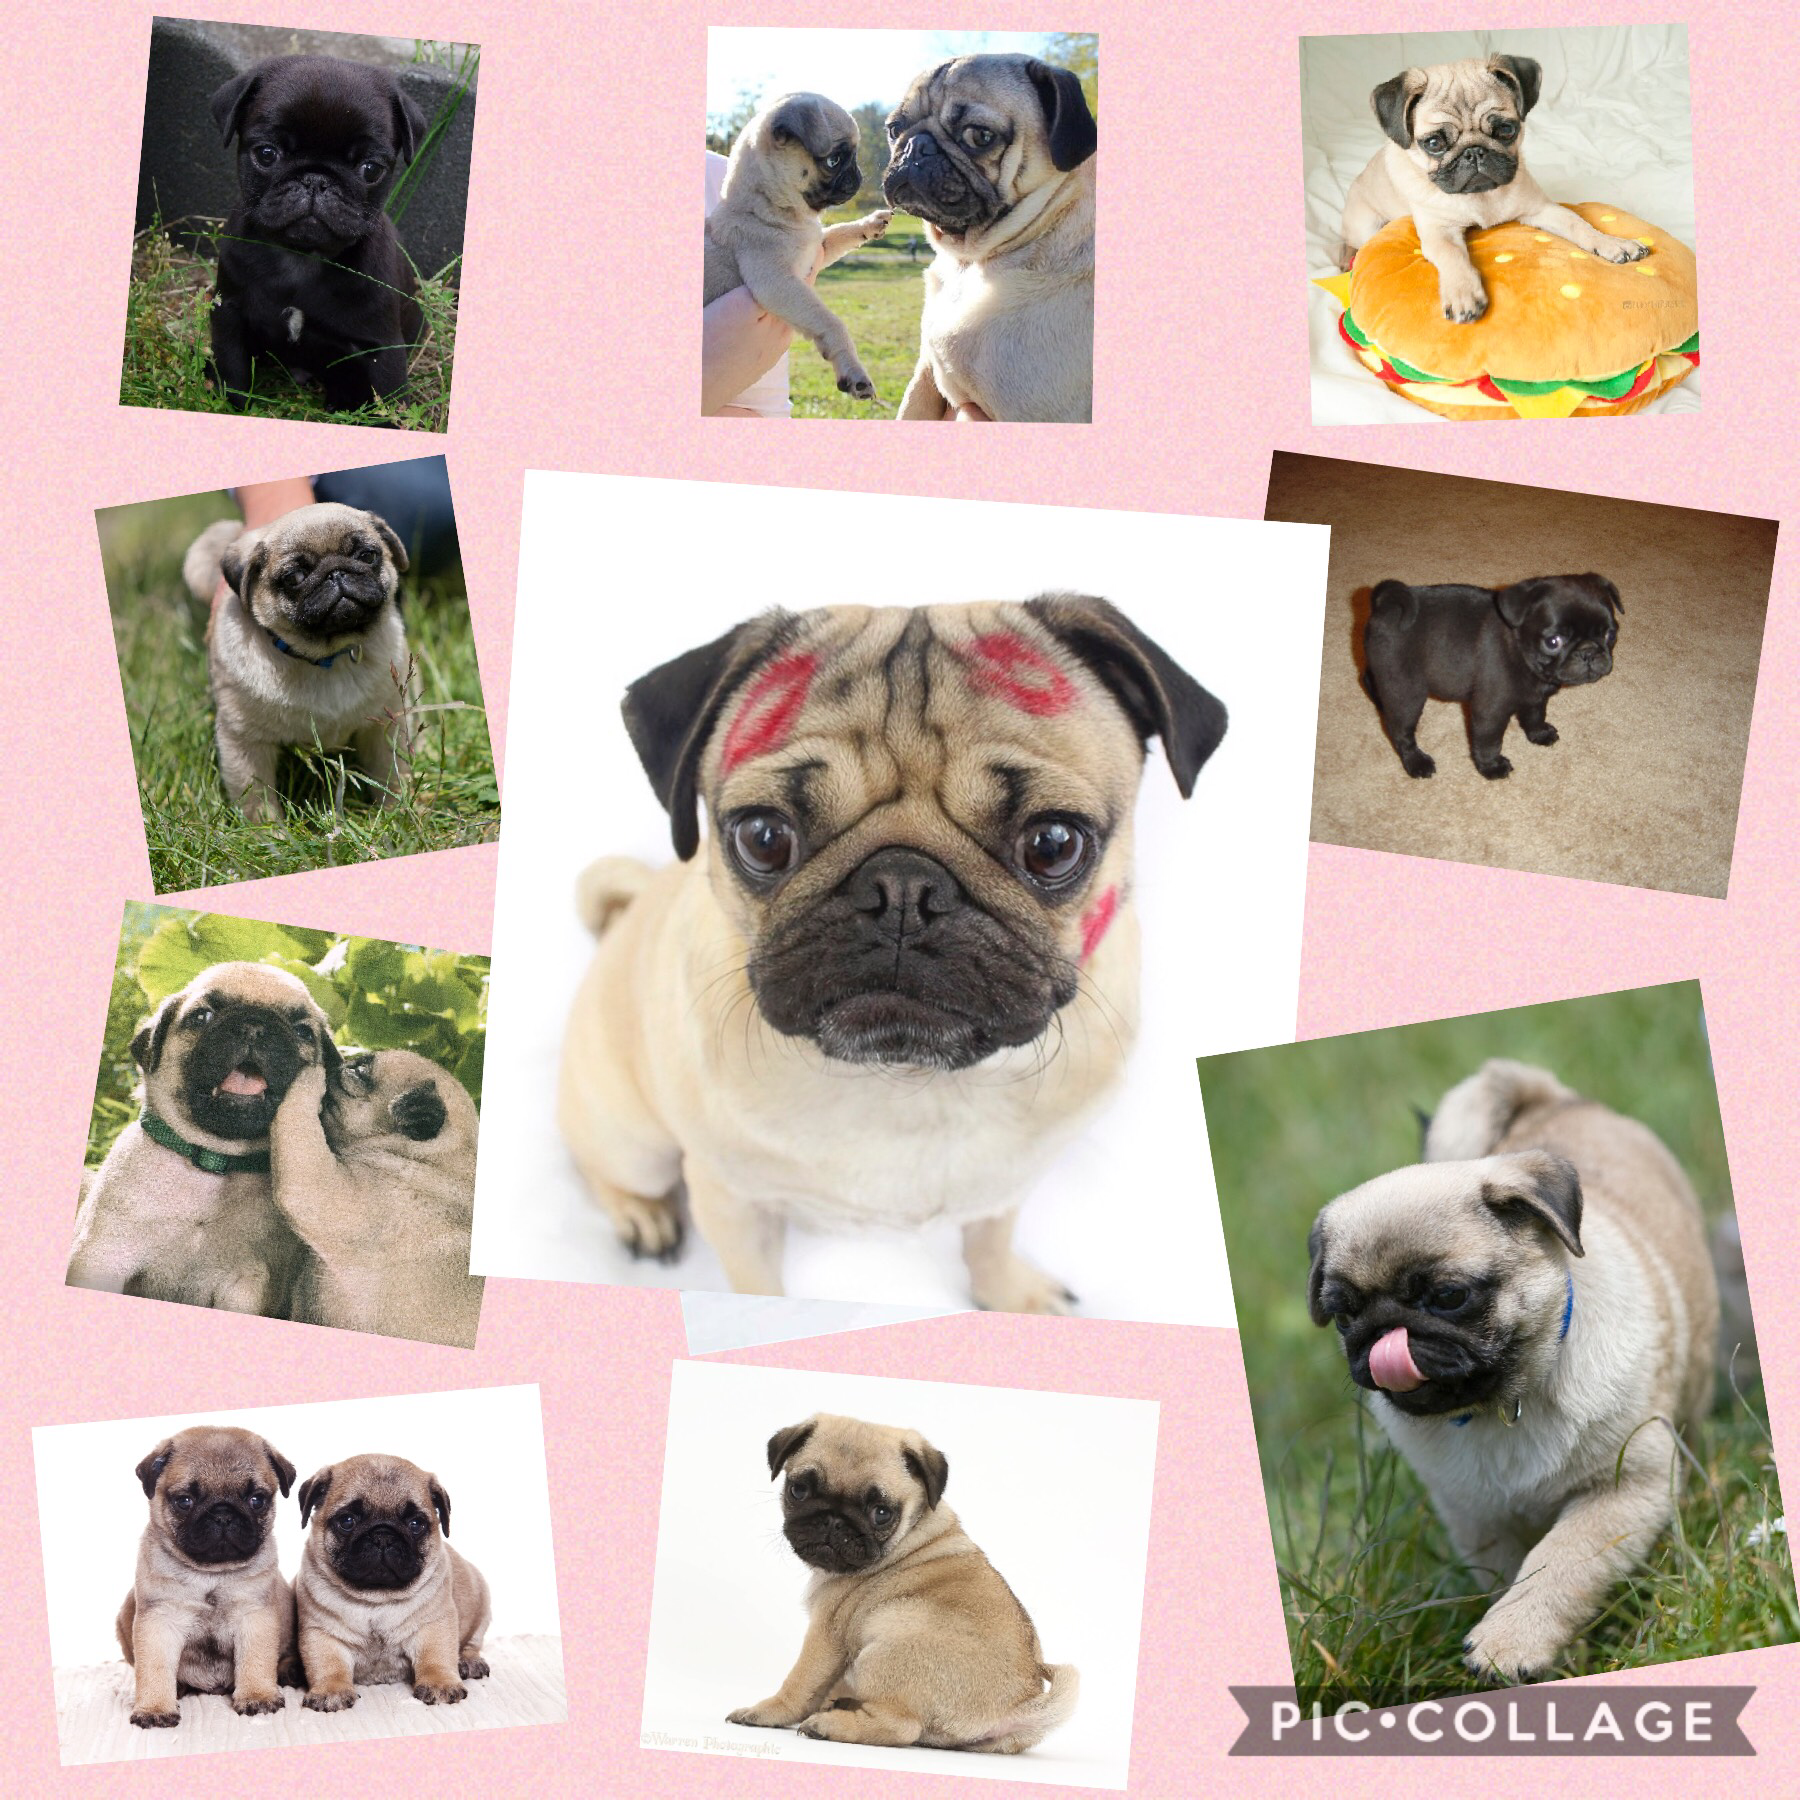 Follow if you luv pugs 